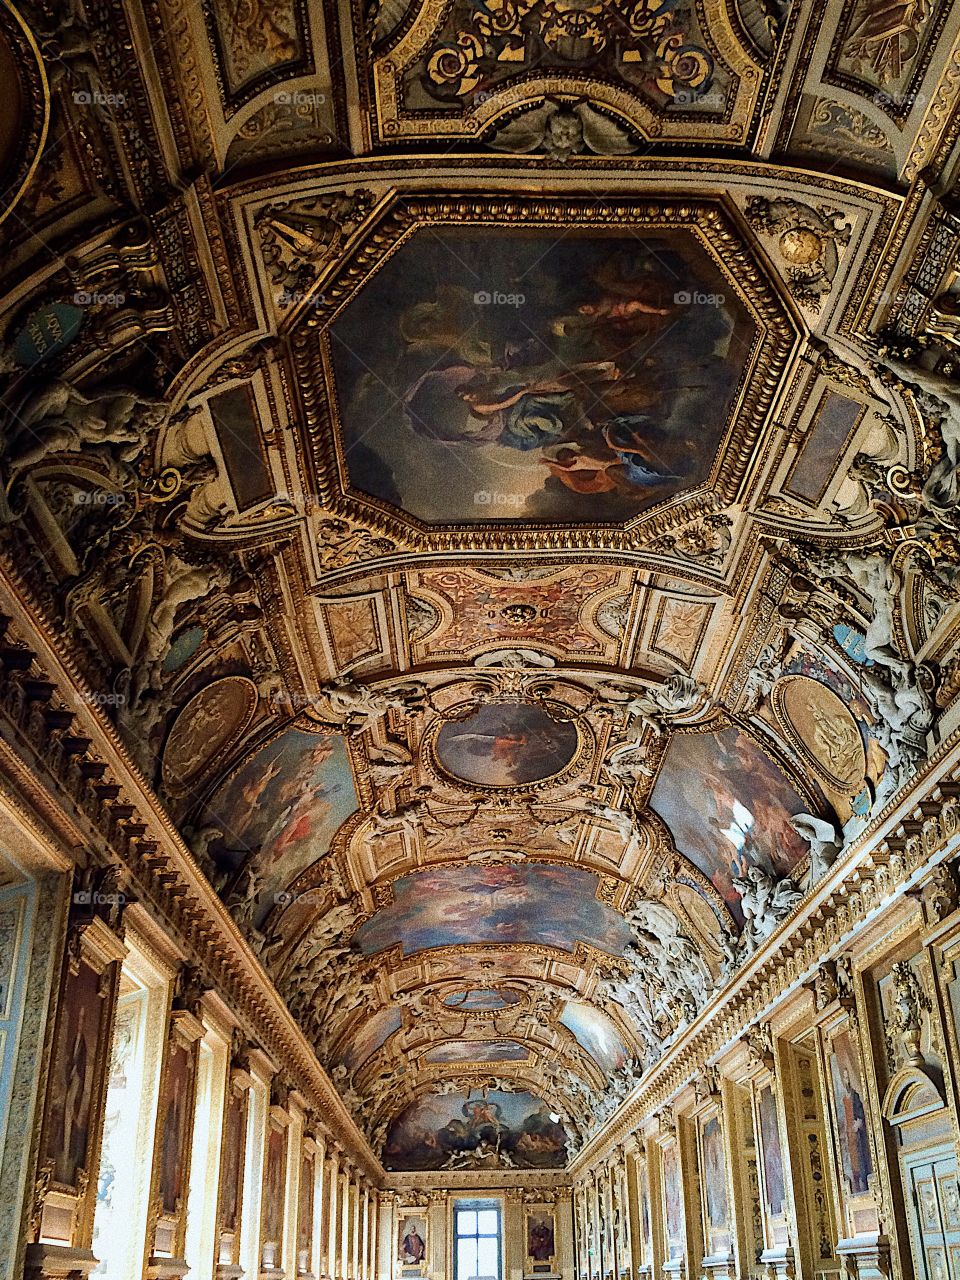 Gilded ceiling at the louvre in Paris,France